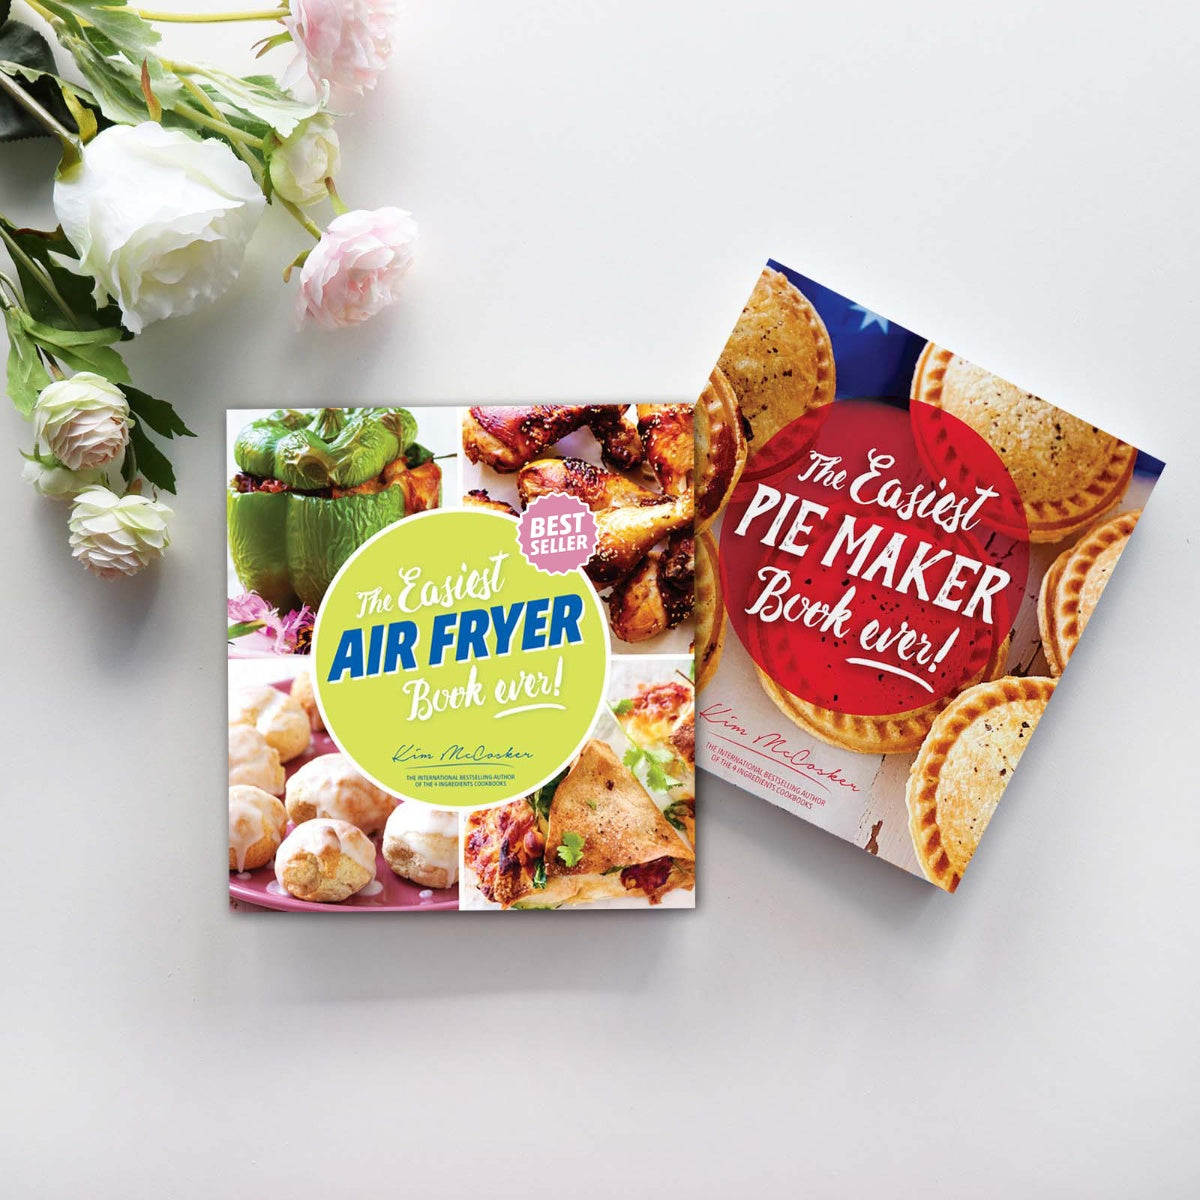 The Easiest Pie Maker Book ever + The Easiest Air Fryer Book ever